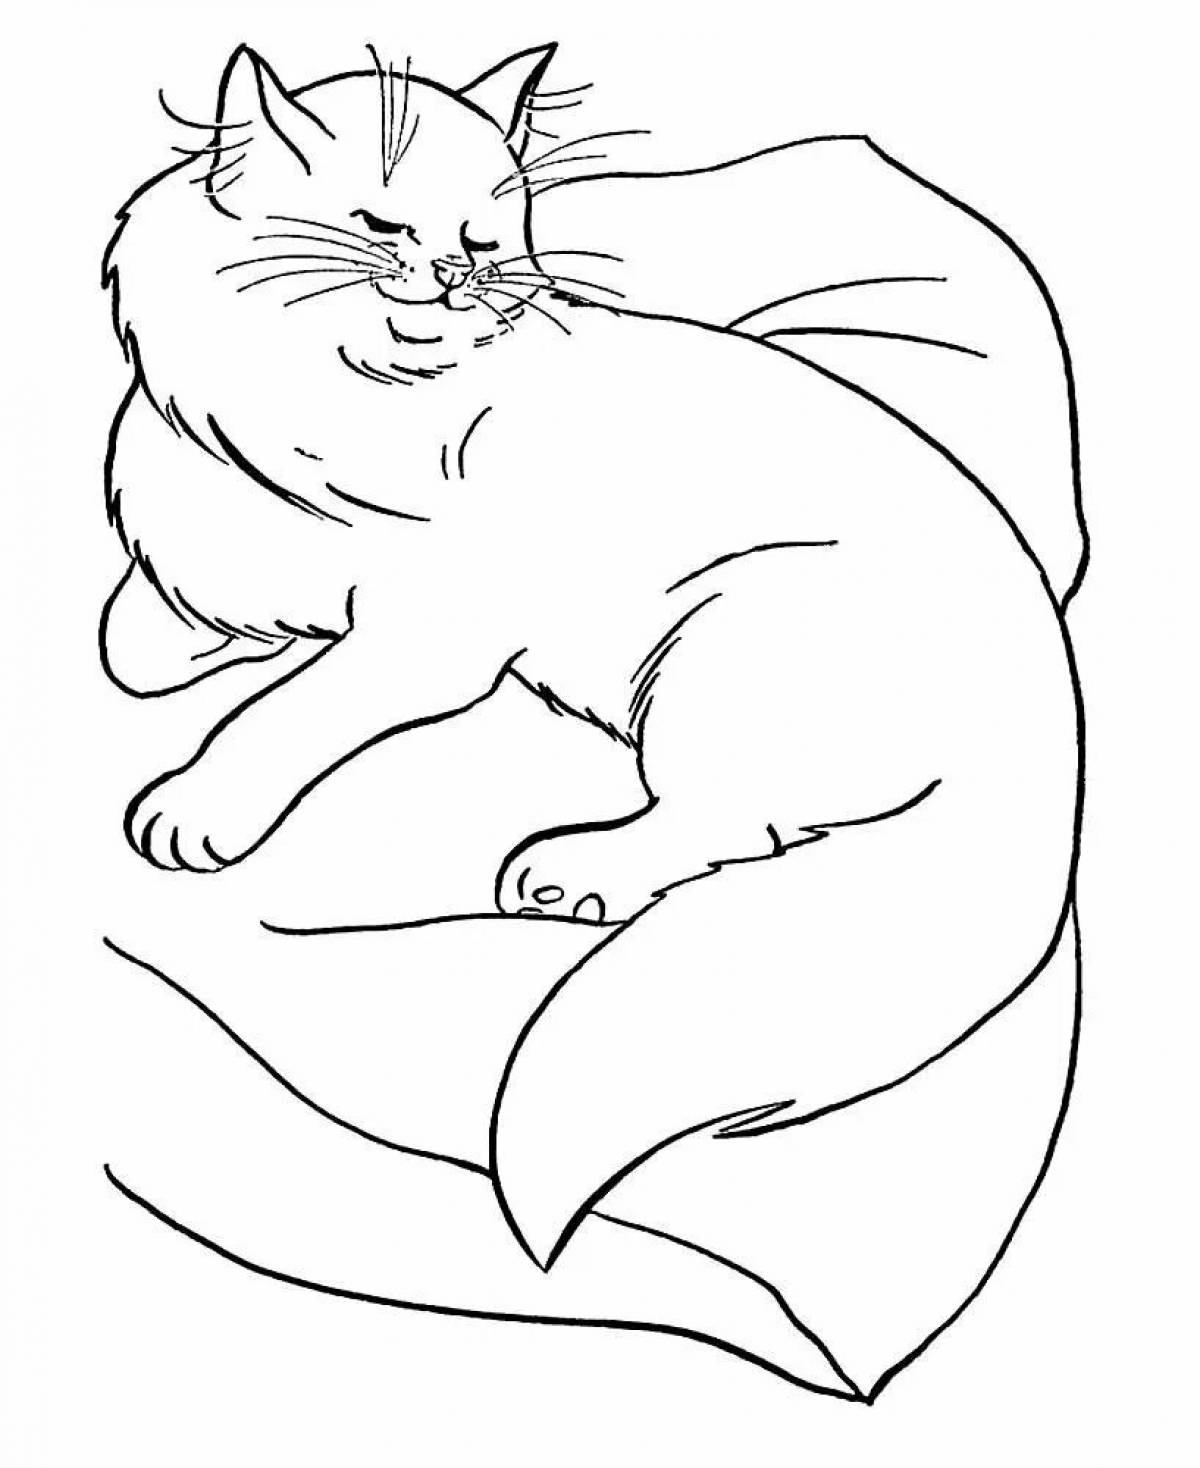 Cunning white cat coloring page